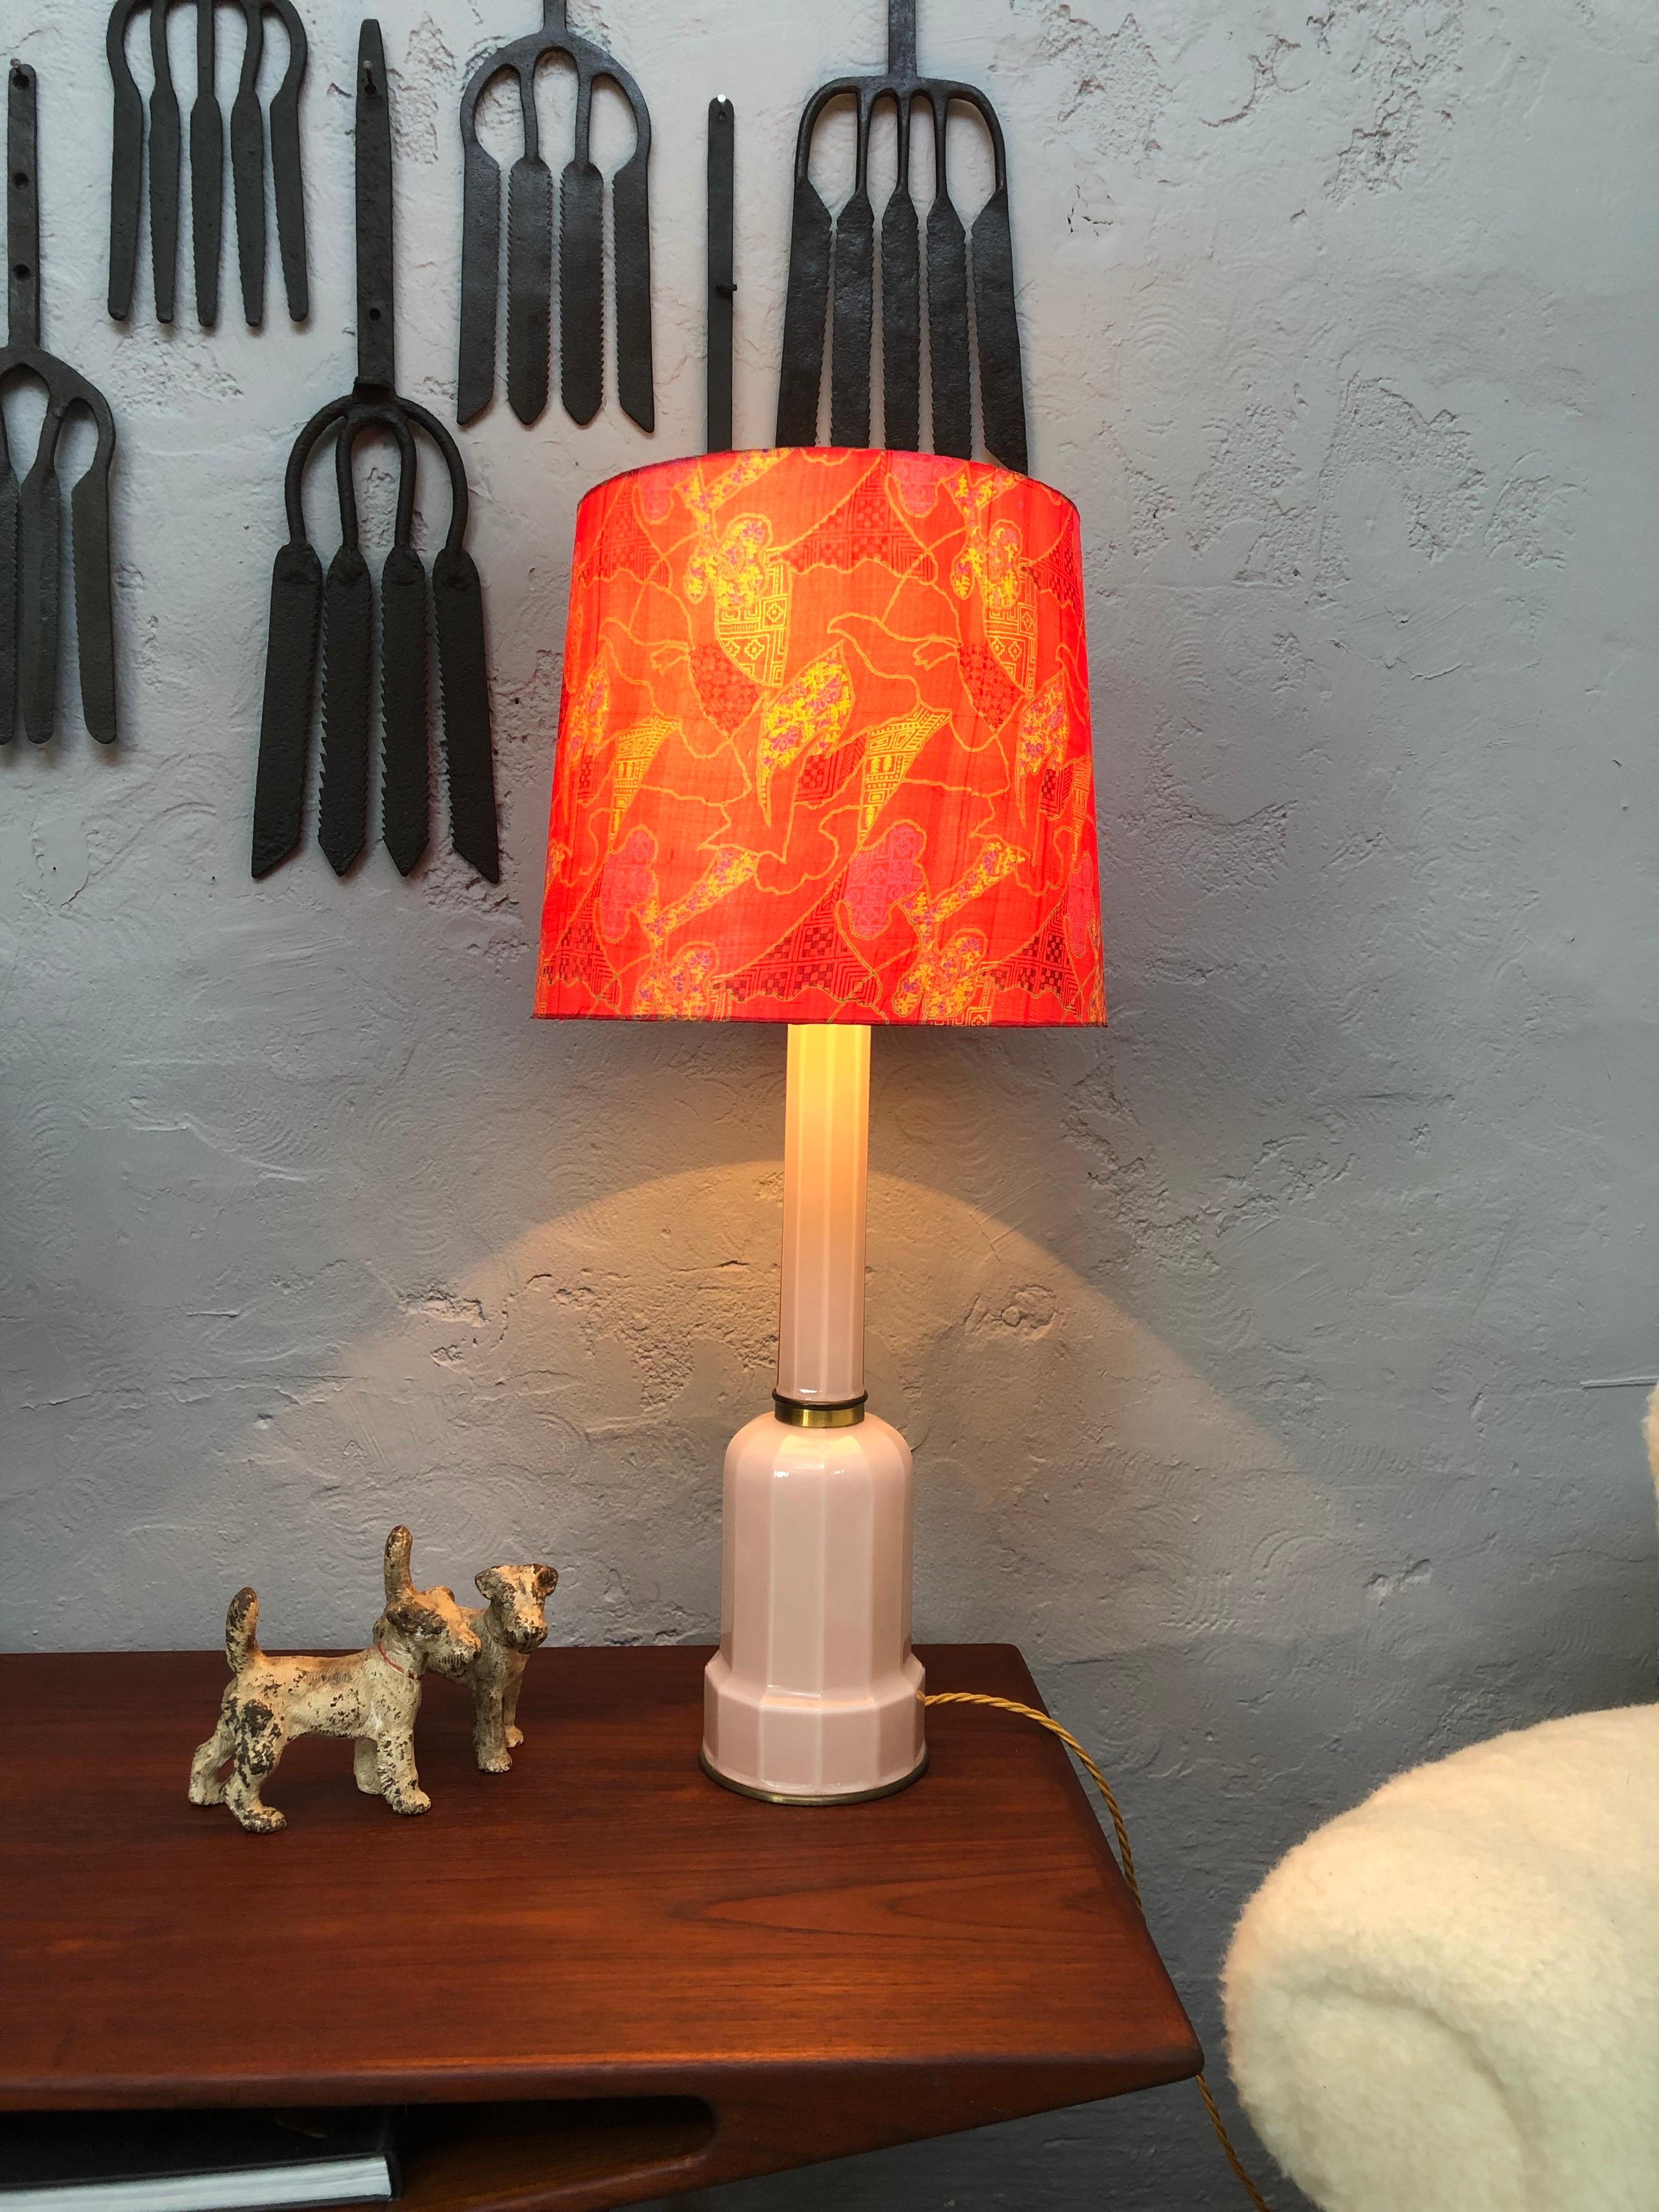 Large vintage pink glass Heiberg table lamp.
Originally Heiberg lamps were oil petroleum lamps from the 19th century.
The name Heiberg is denoted from a 19th century painting of the Heiberg family who had such a lamp on their table.
Please see the